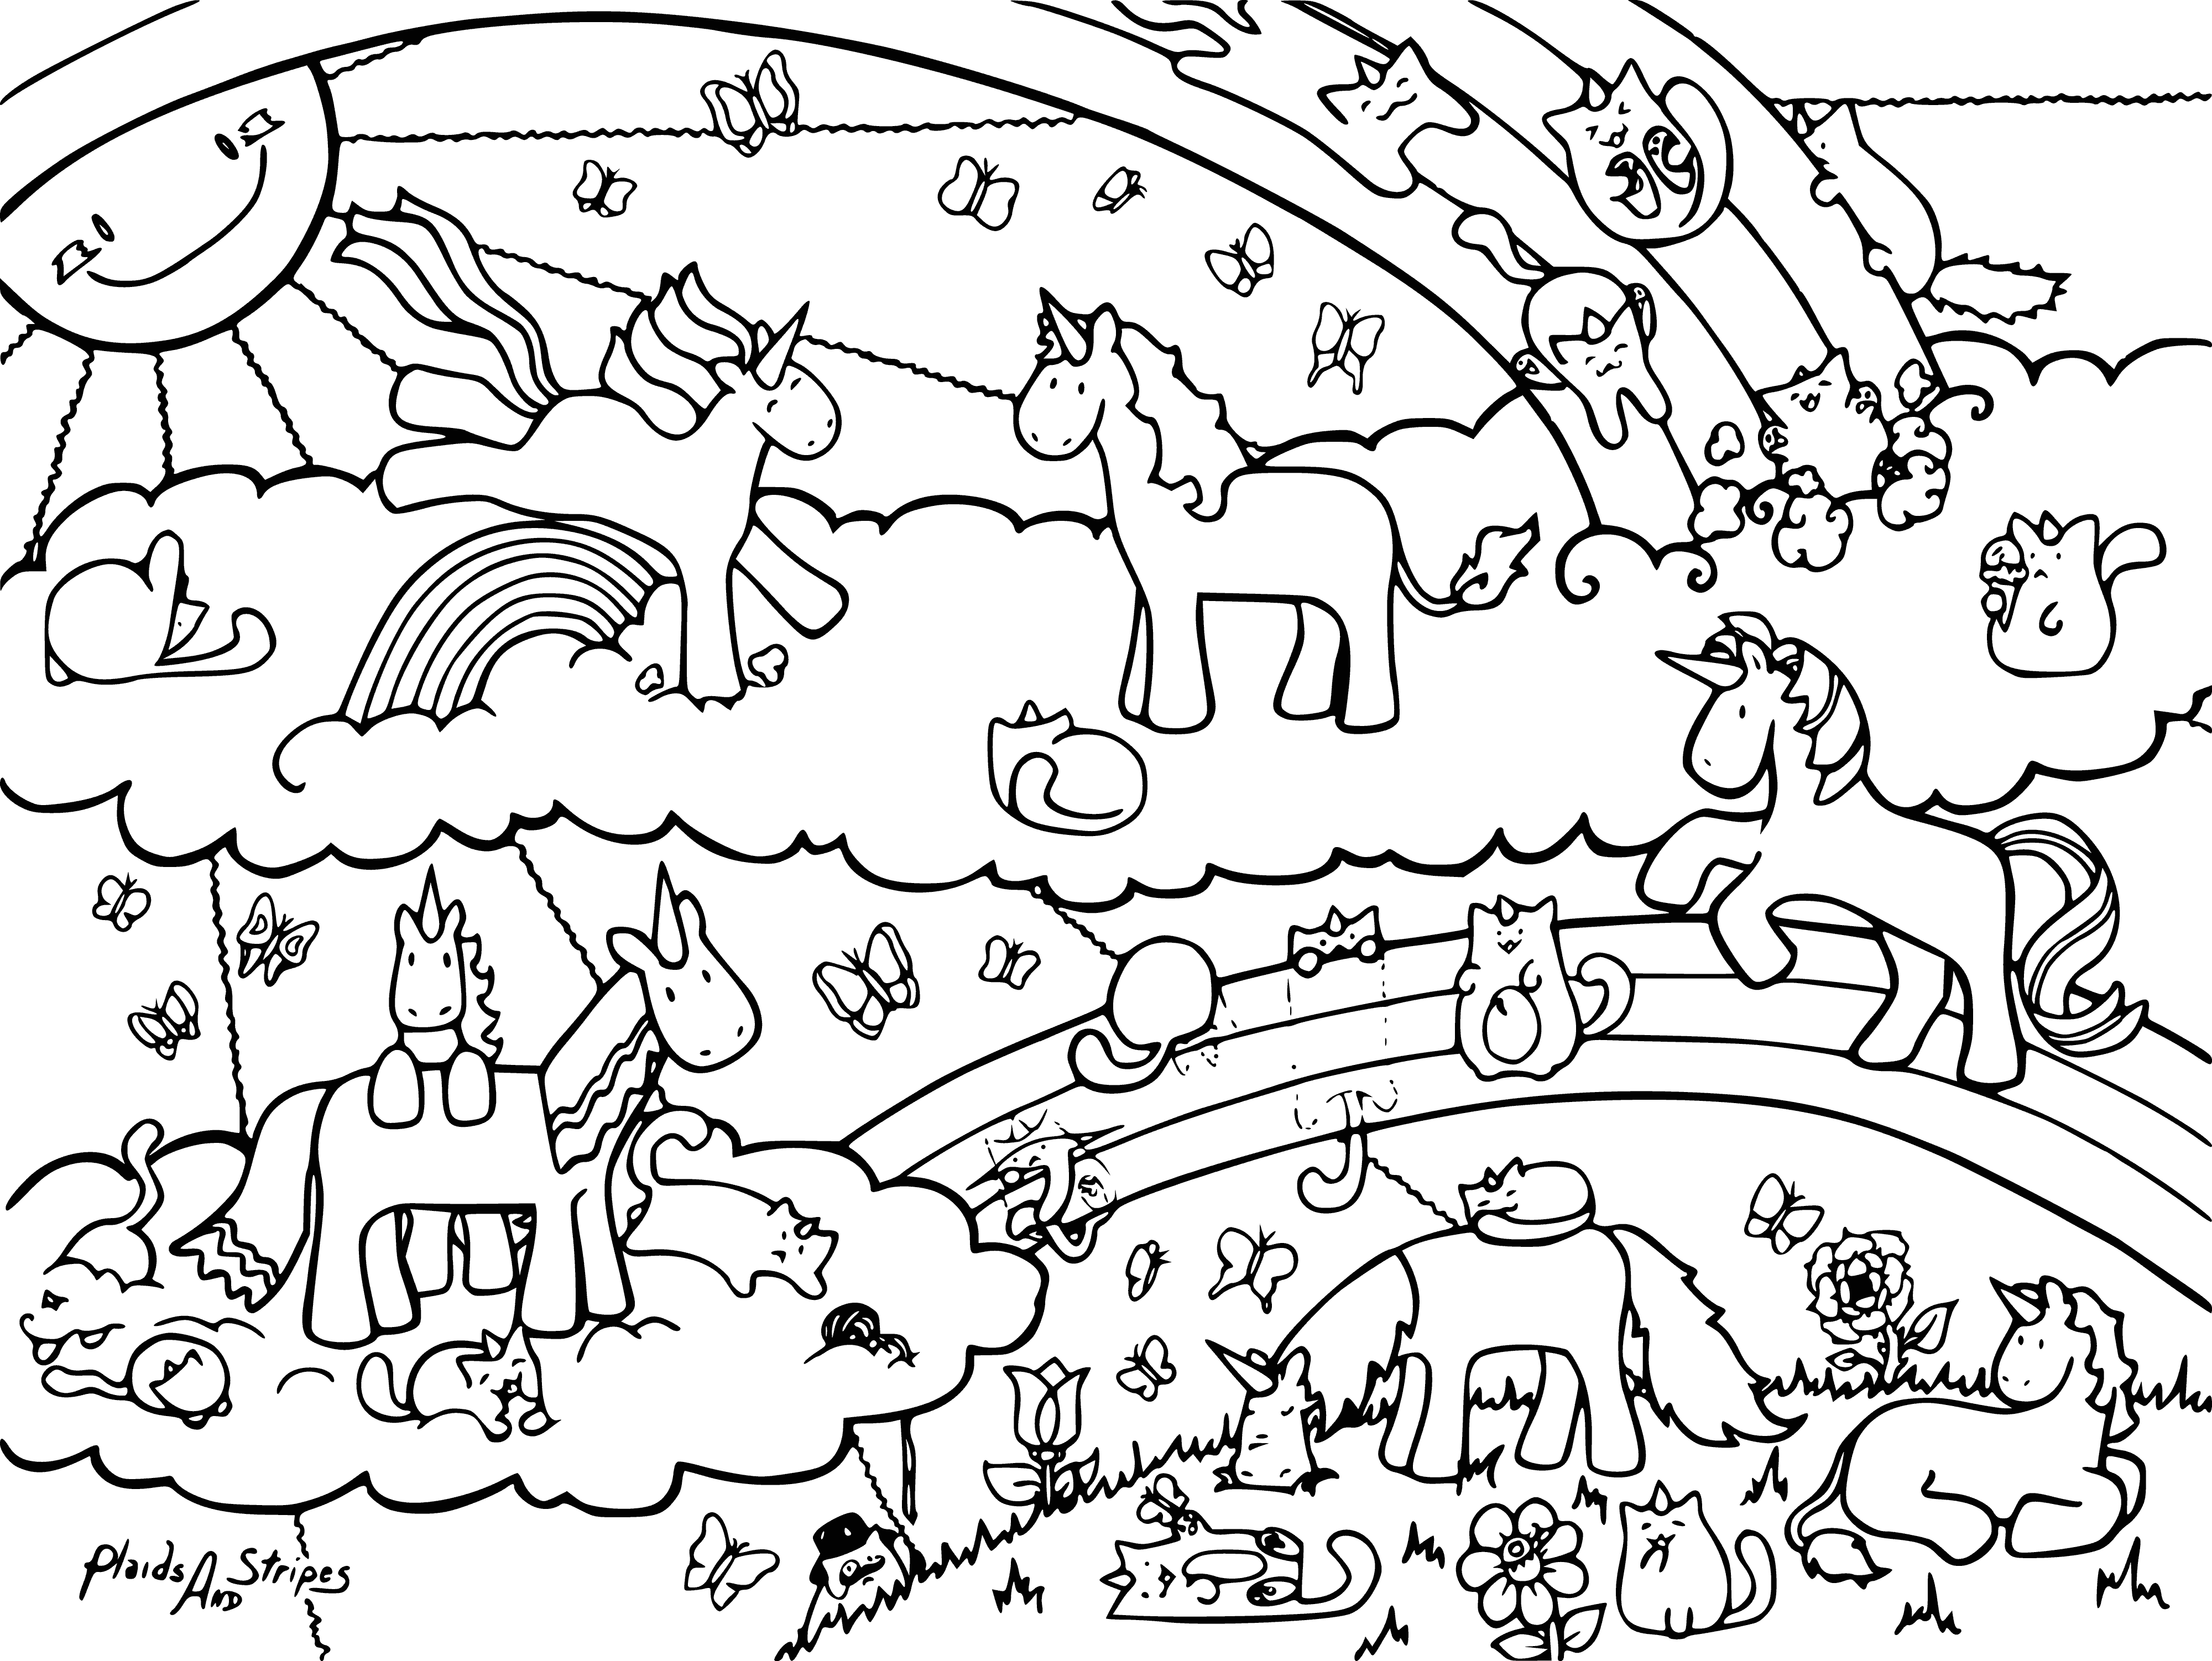 Unicorns and cats coloring page